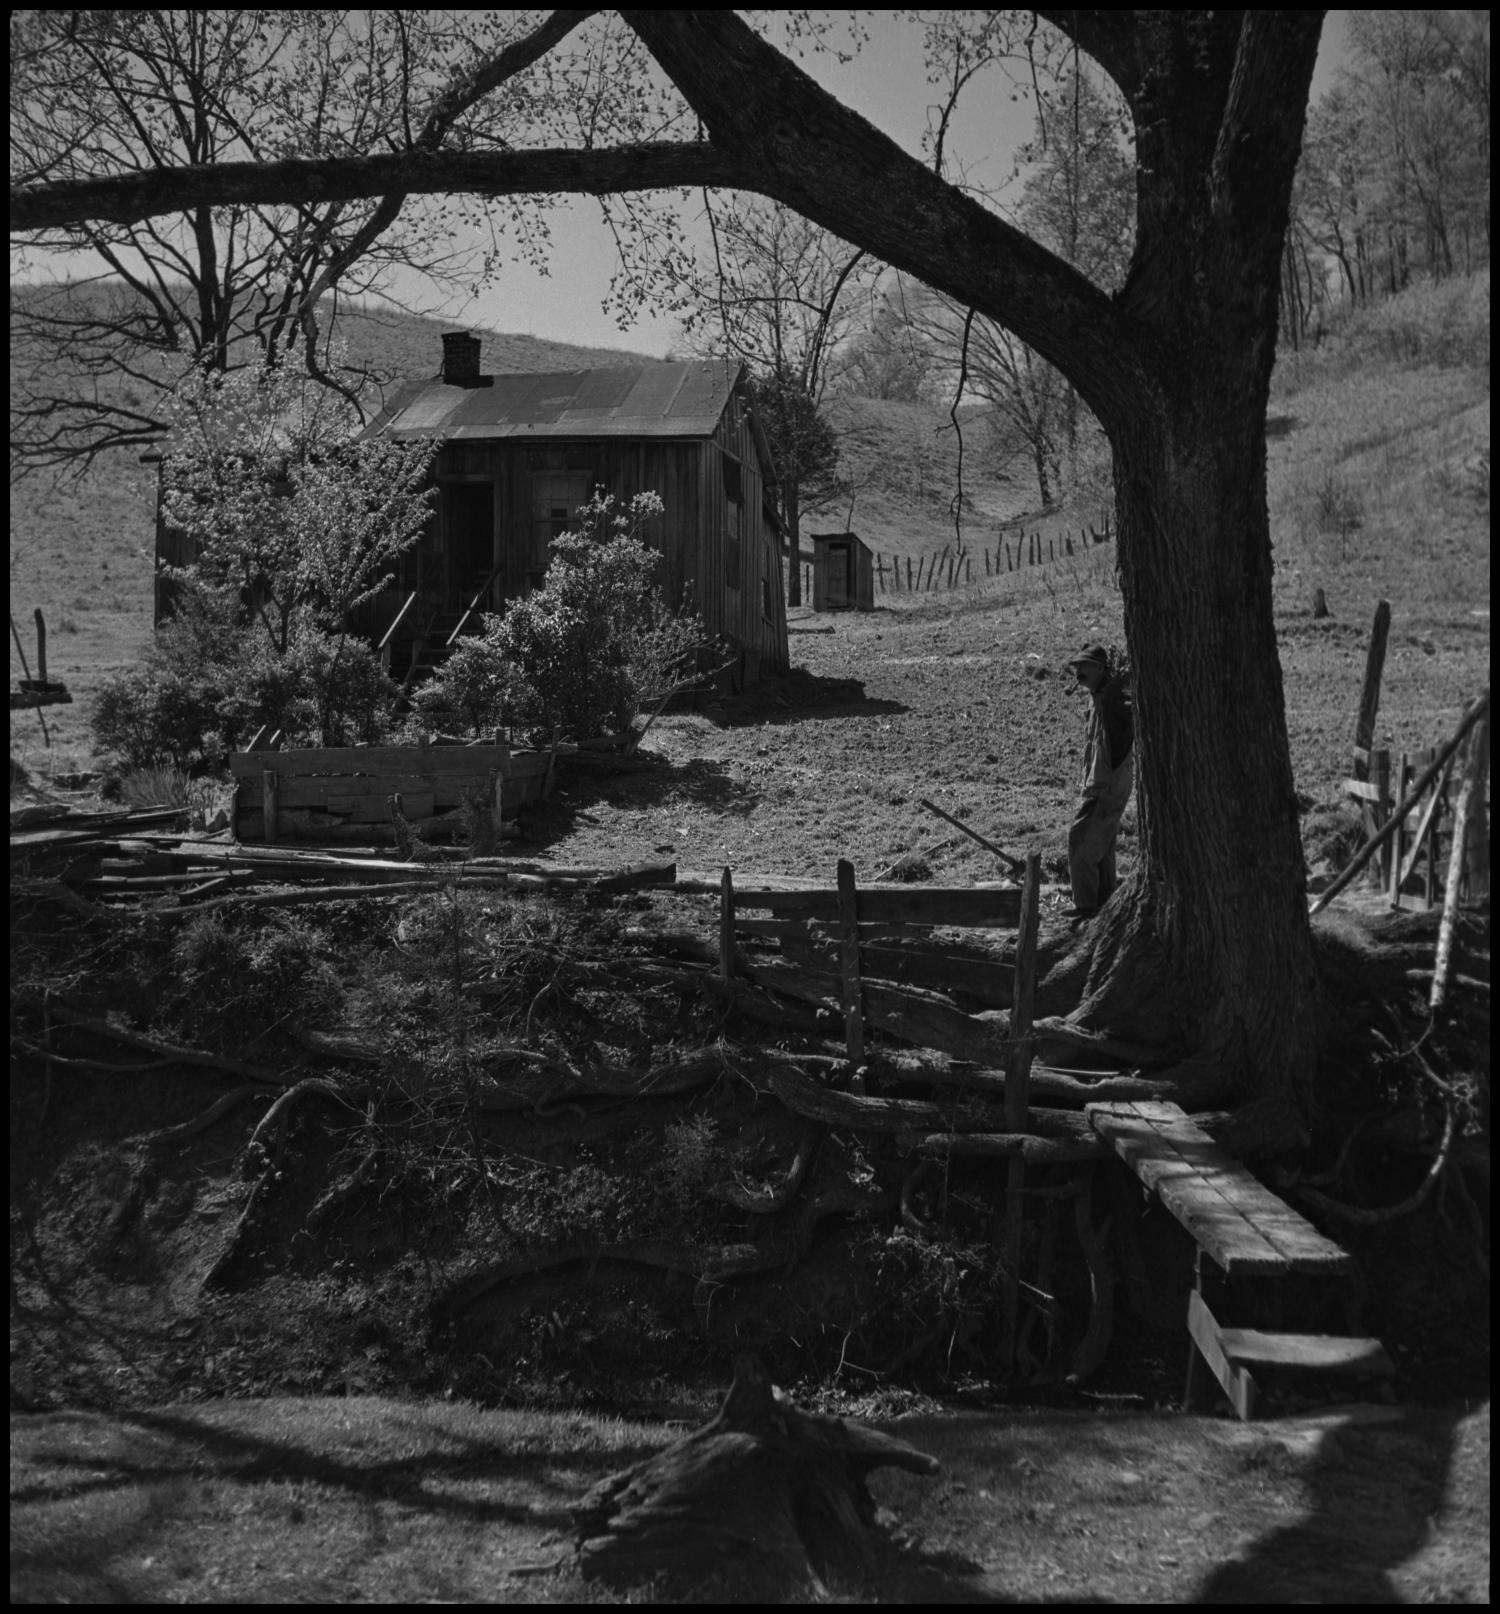 [Farm house scene], Photograph of a man leaning against a tree. The tree is on the bank of a small creek. There is a make shift bridge crossing the creek. There is a farm house as well as an outhouse in the background of the photograph., 